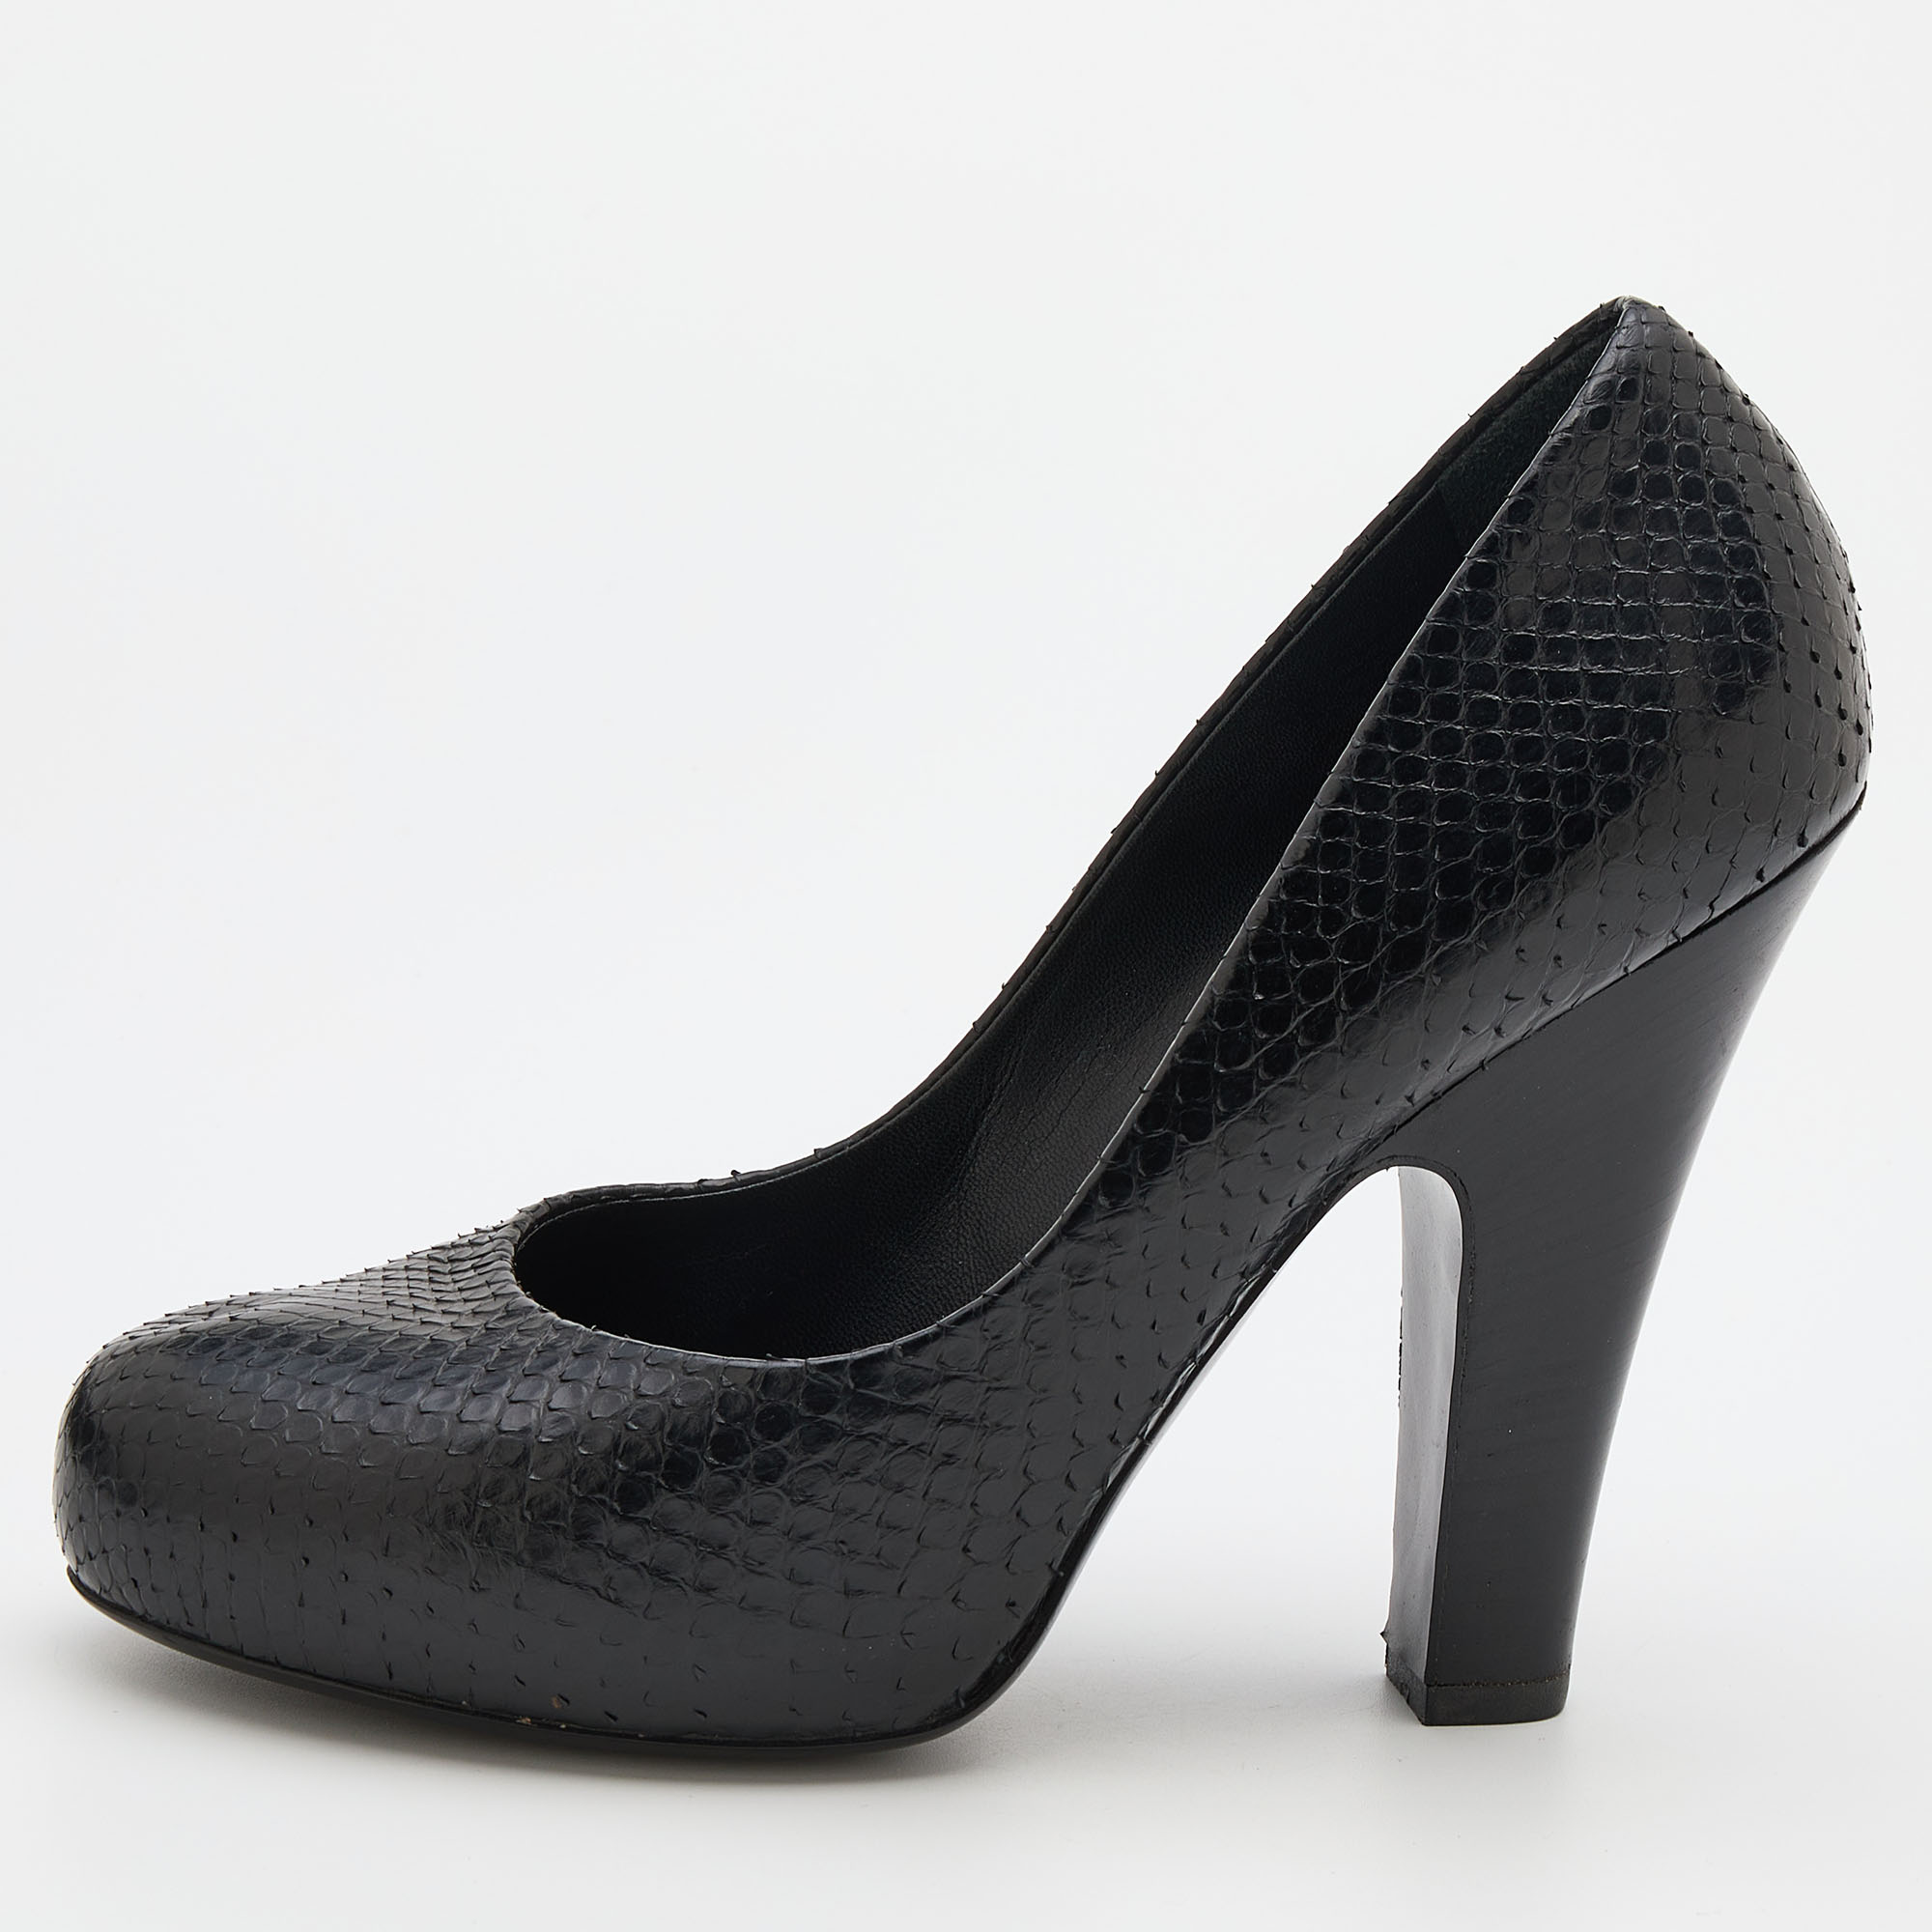 This pair of classy Bottega Veneta pumps is minimally designed. Crafted from python leather it is uplifted on block heels and it will elegantly follow along the contour of your feet.